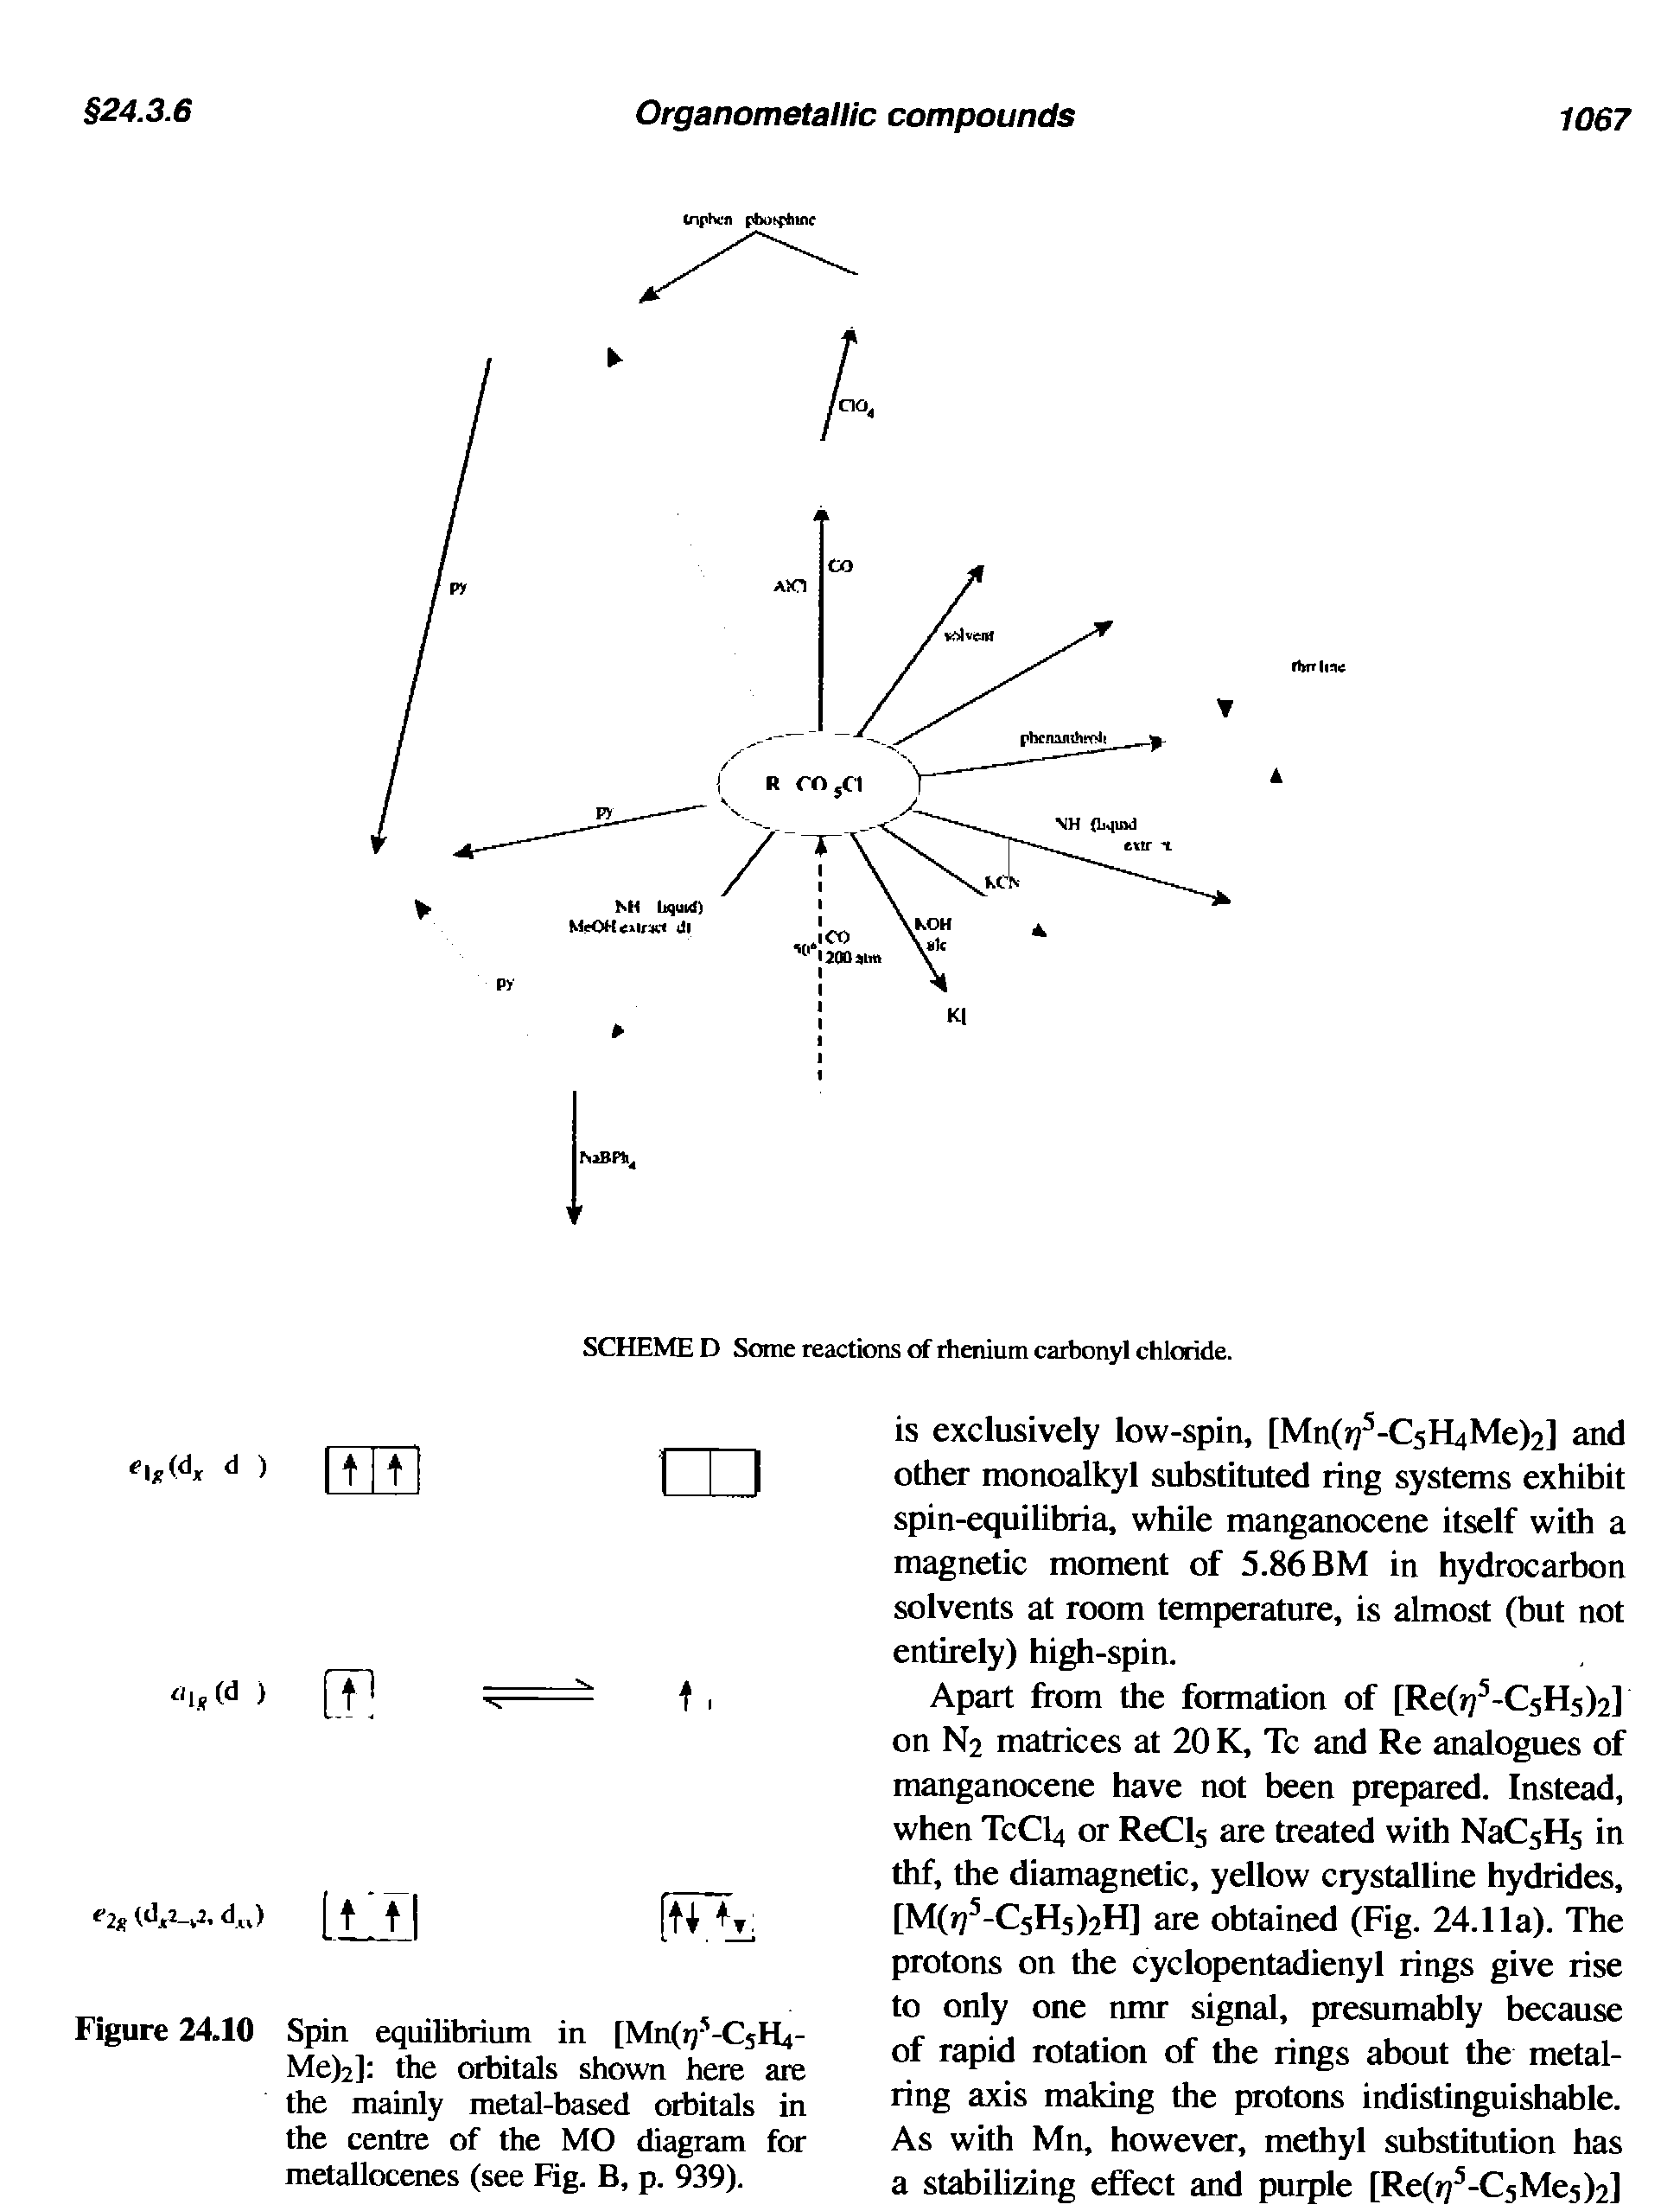 Figure 24.10 Spin equilibrium in [Mn(ij -C5H4-Me)2] the orbitals shown here are the mainly metal-based orbitals in the centre of the MO diagram for metallocenes (see Fig. B, p. 939).